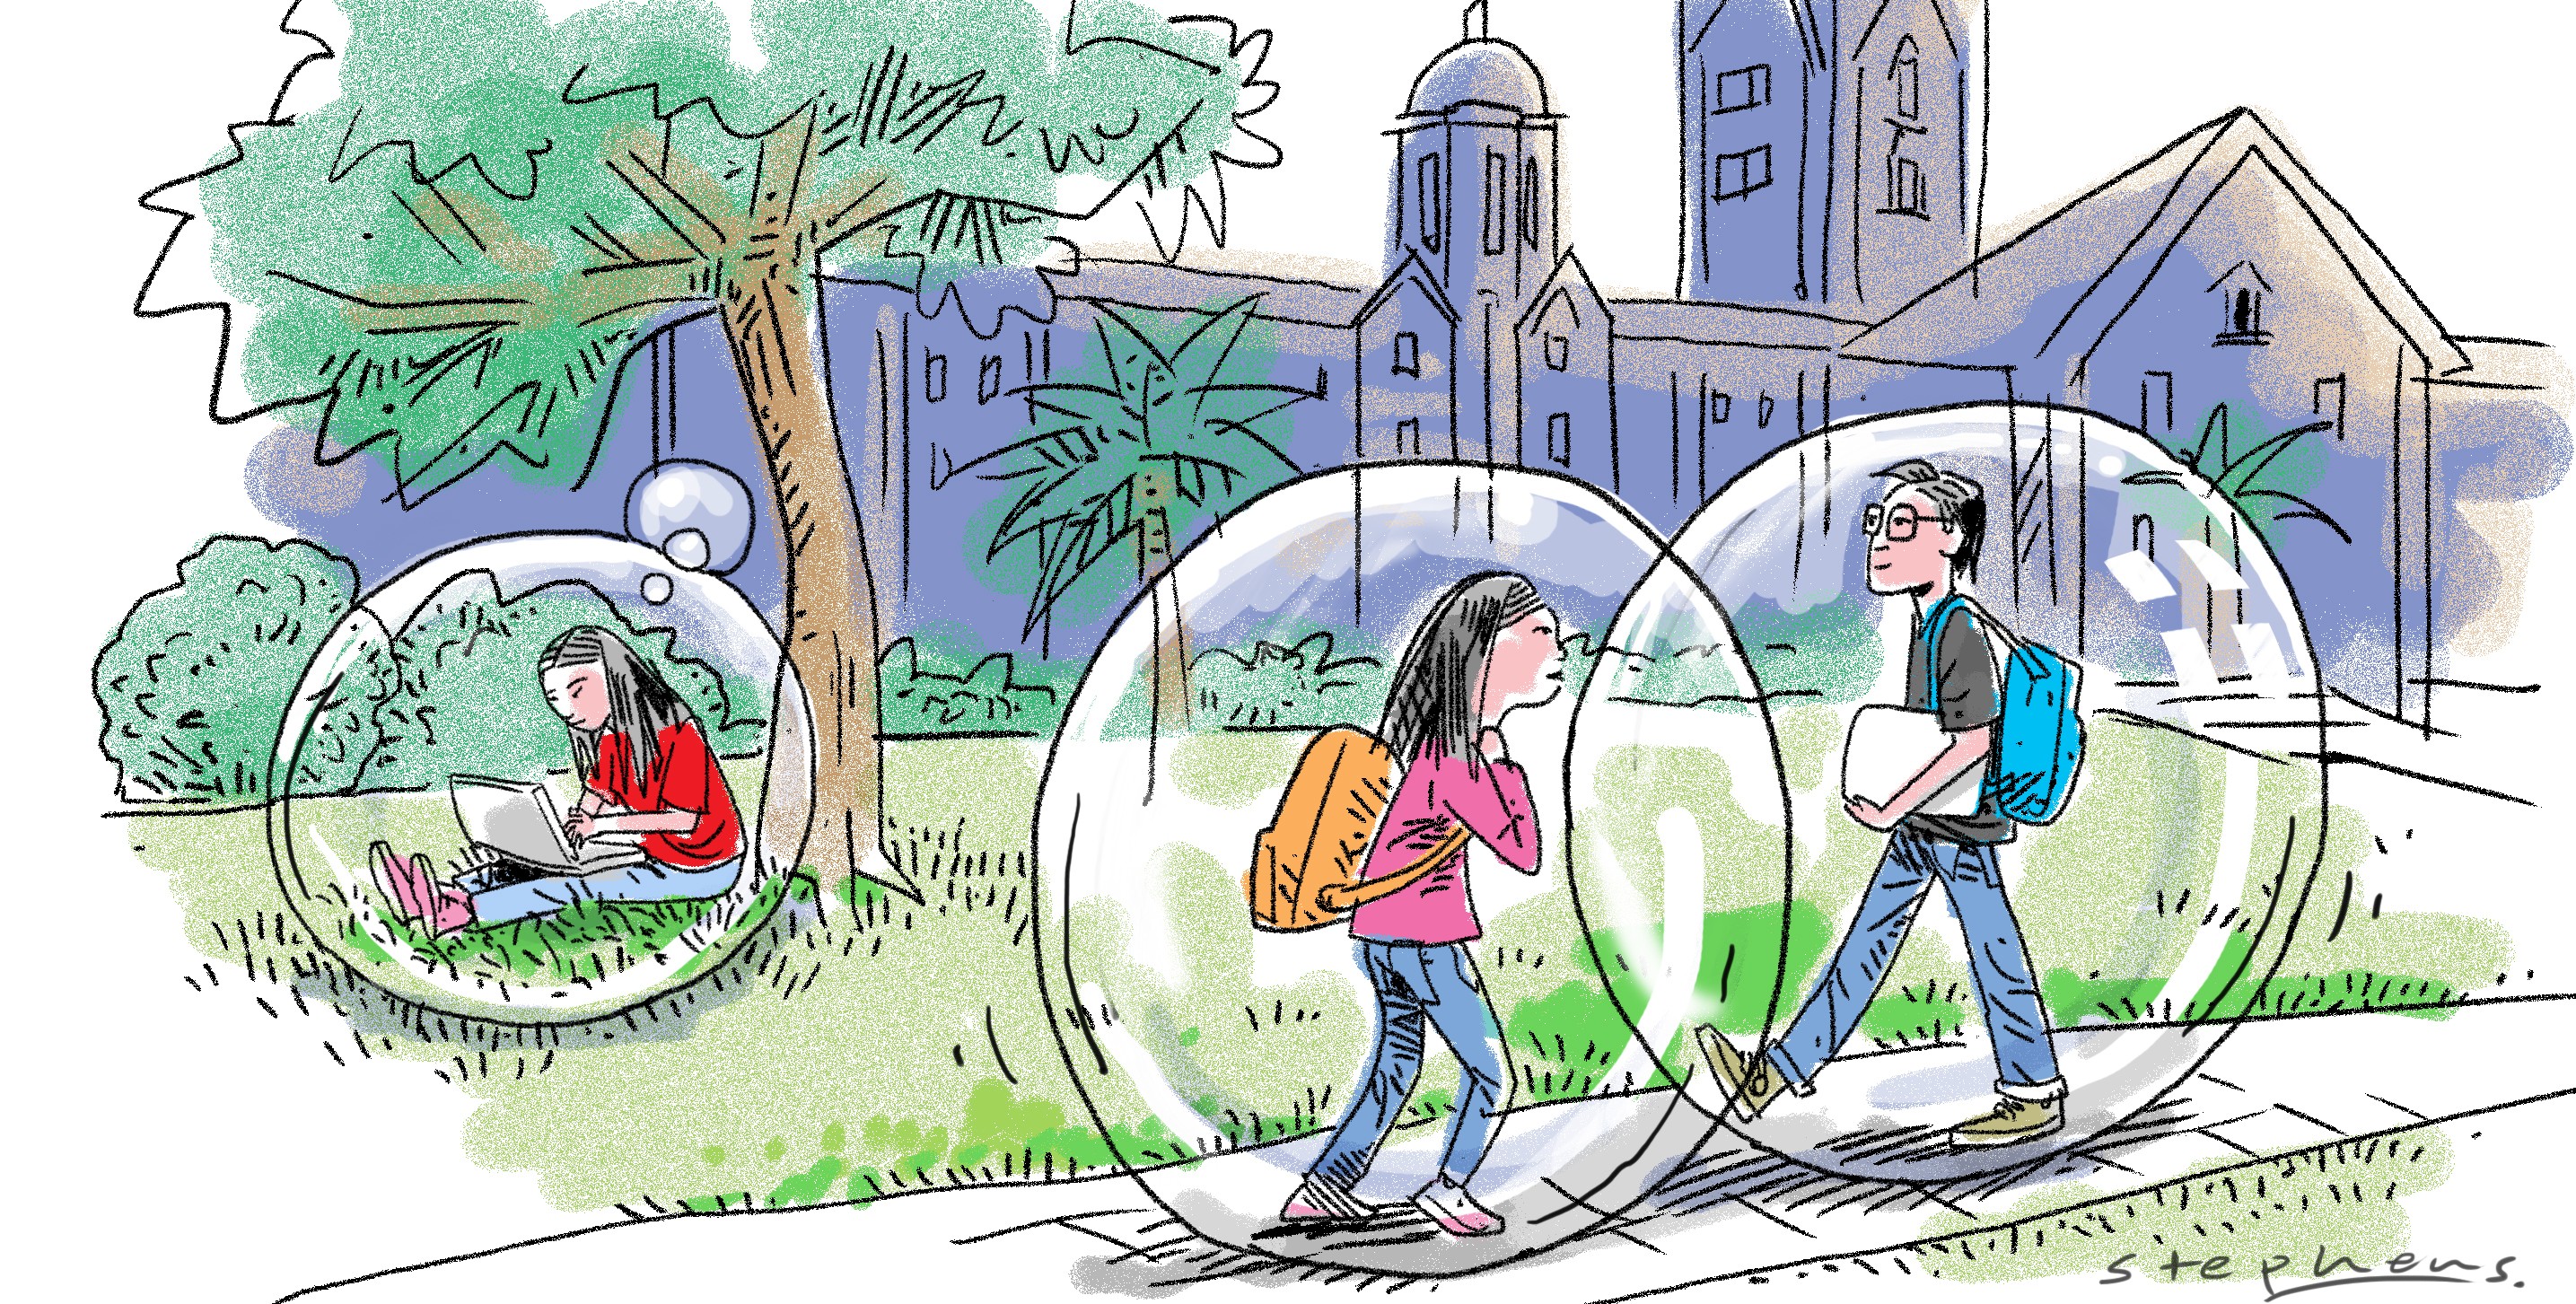 Social media in particular creates a bubble for students. They listen only to views that are the same as theirs, they form peer groups around social media platforms, thus sealing the bubble even more, and they constantly have their views reinforced. Illustration: Craig Stephens